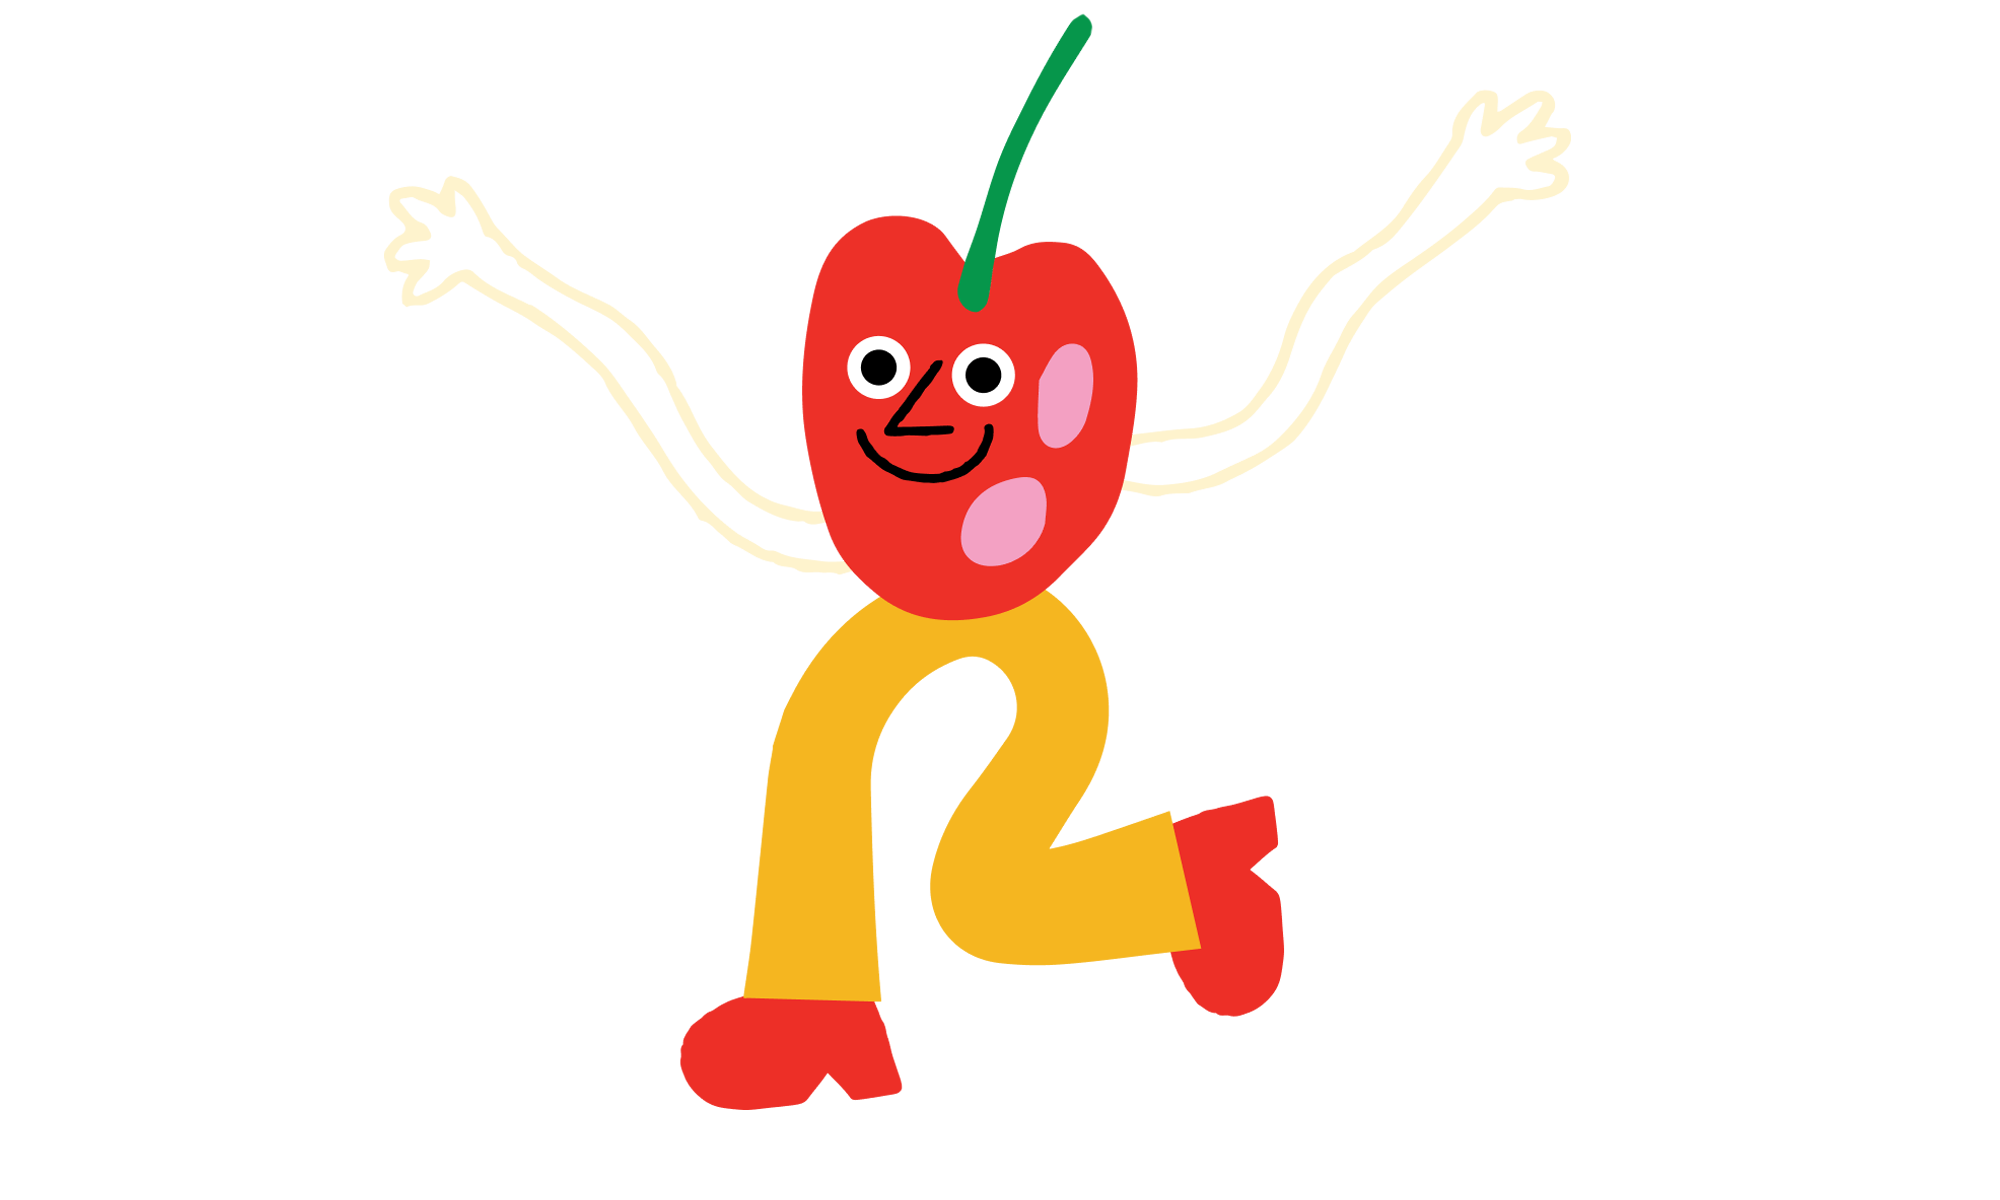 Cute cherry graphic. Cherry character is waving arms in the air, smiling at the camera, and has its right foot kicked back.